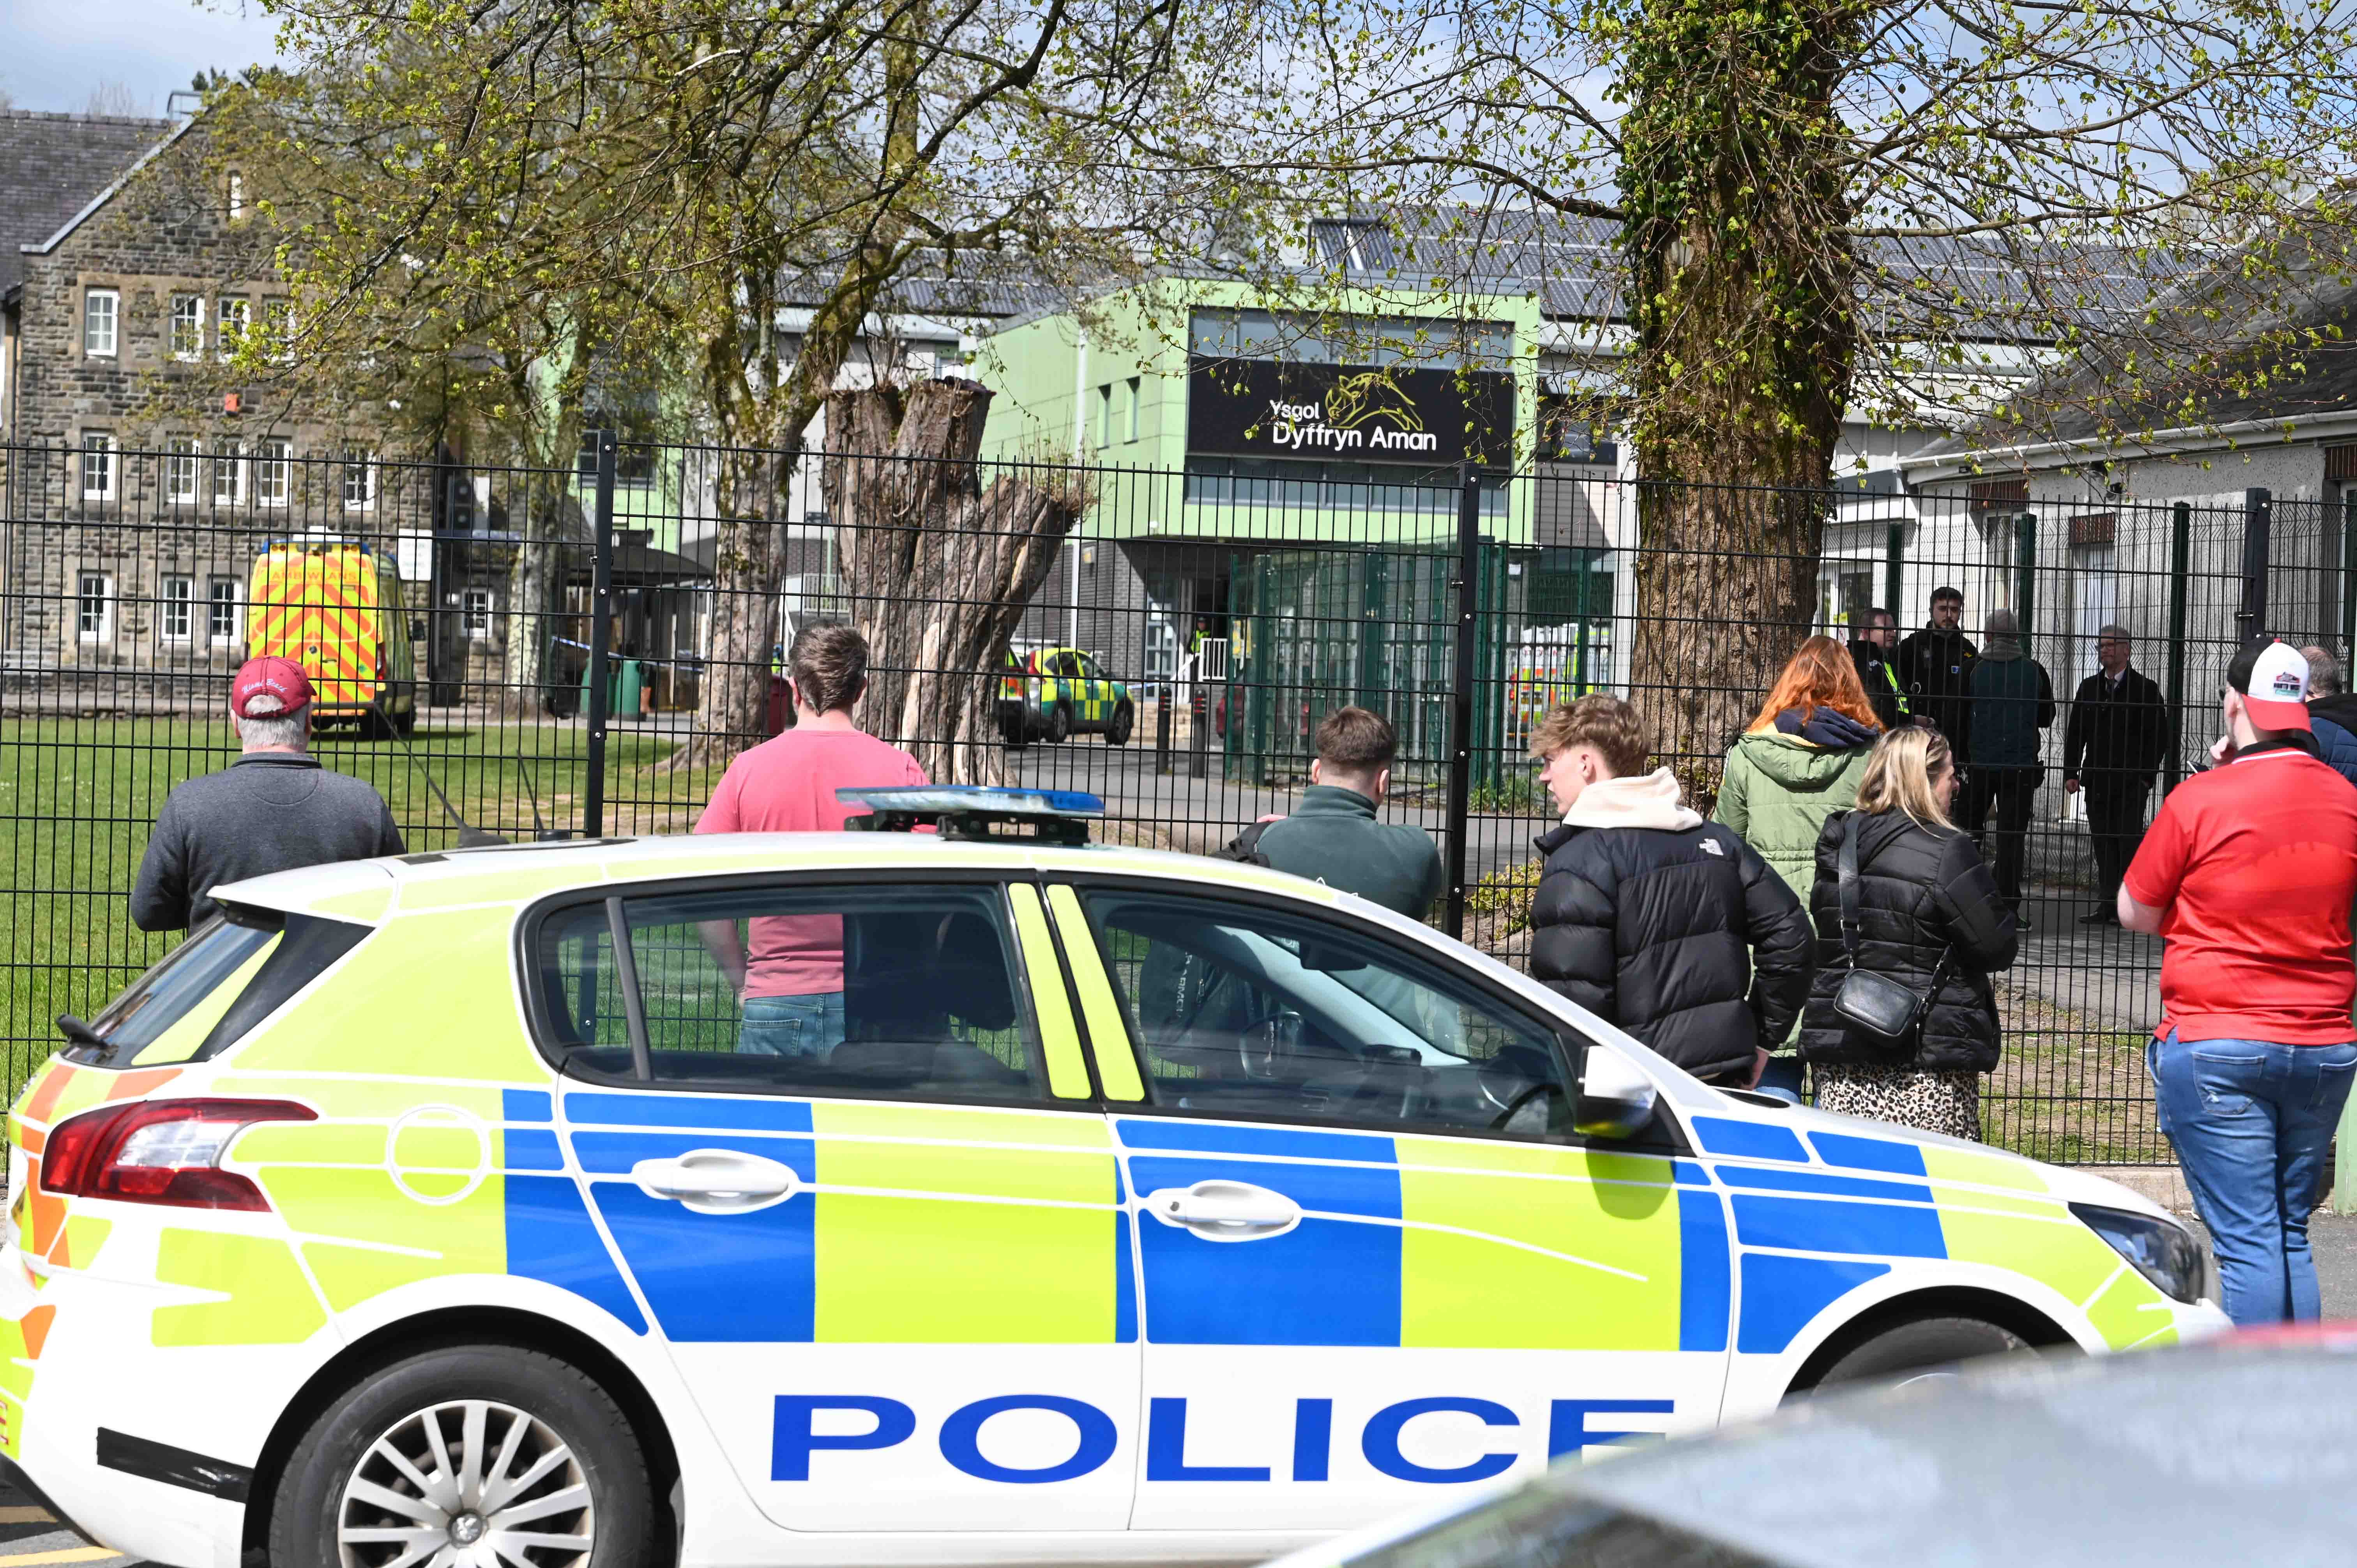 Pupils spent the afternoon in lockdown while police dealt with the incident